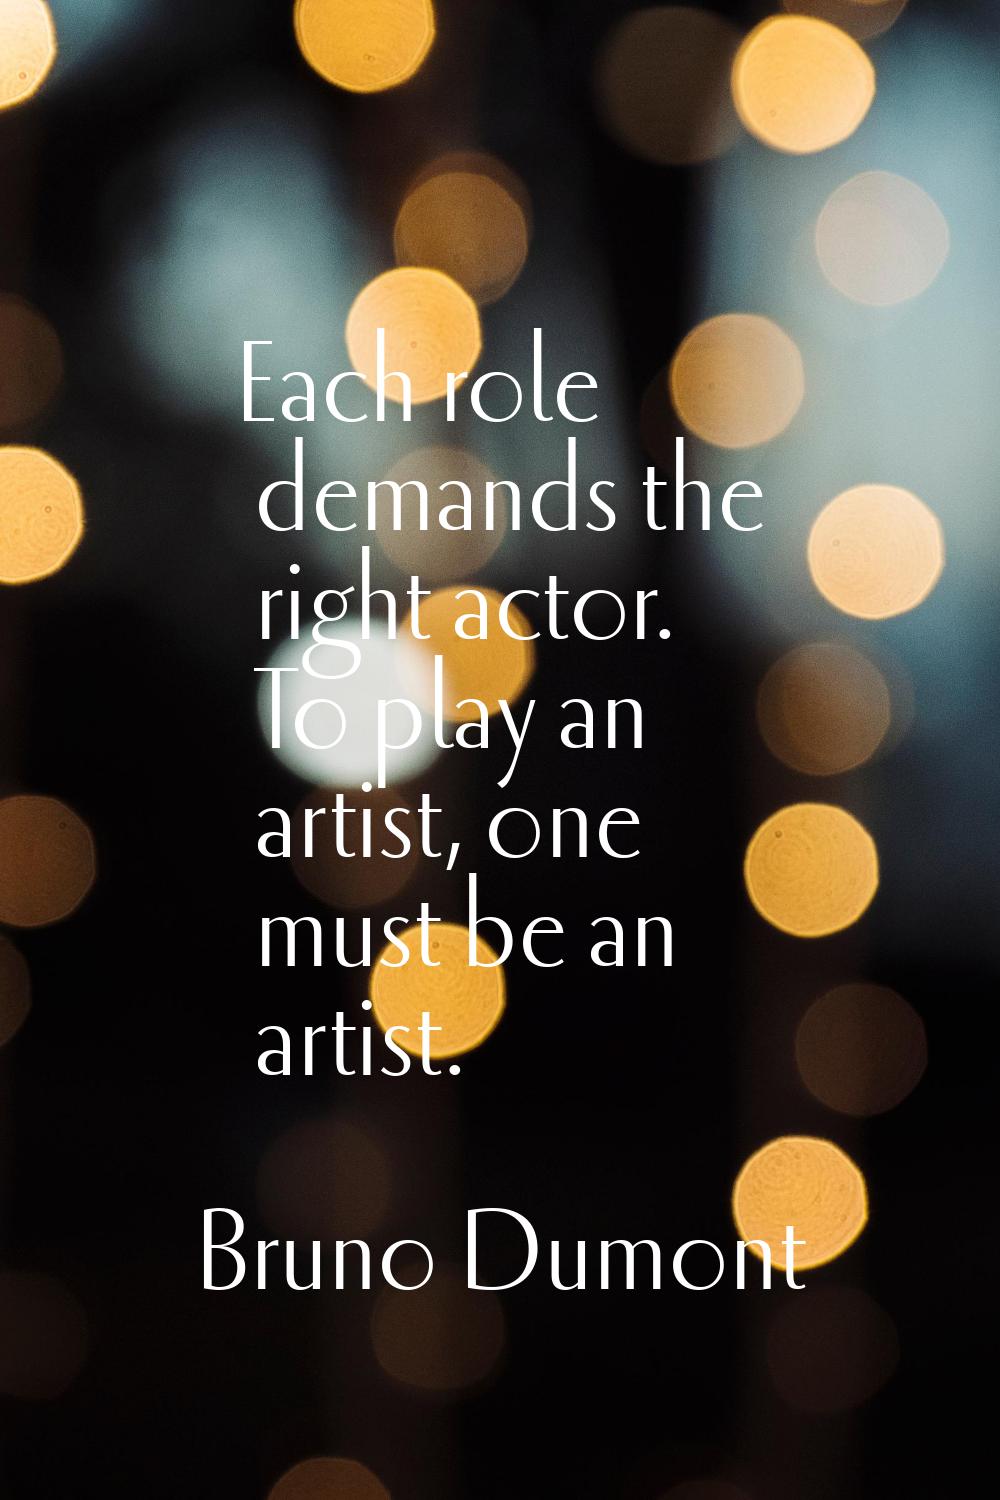 Each role demands the right actor. To play an artist, one must be an artist.